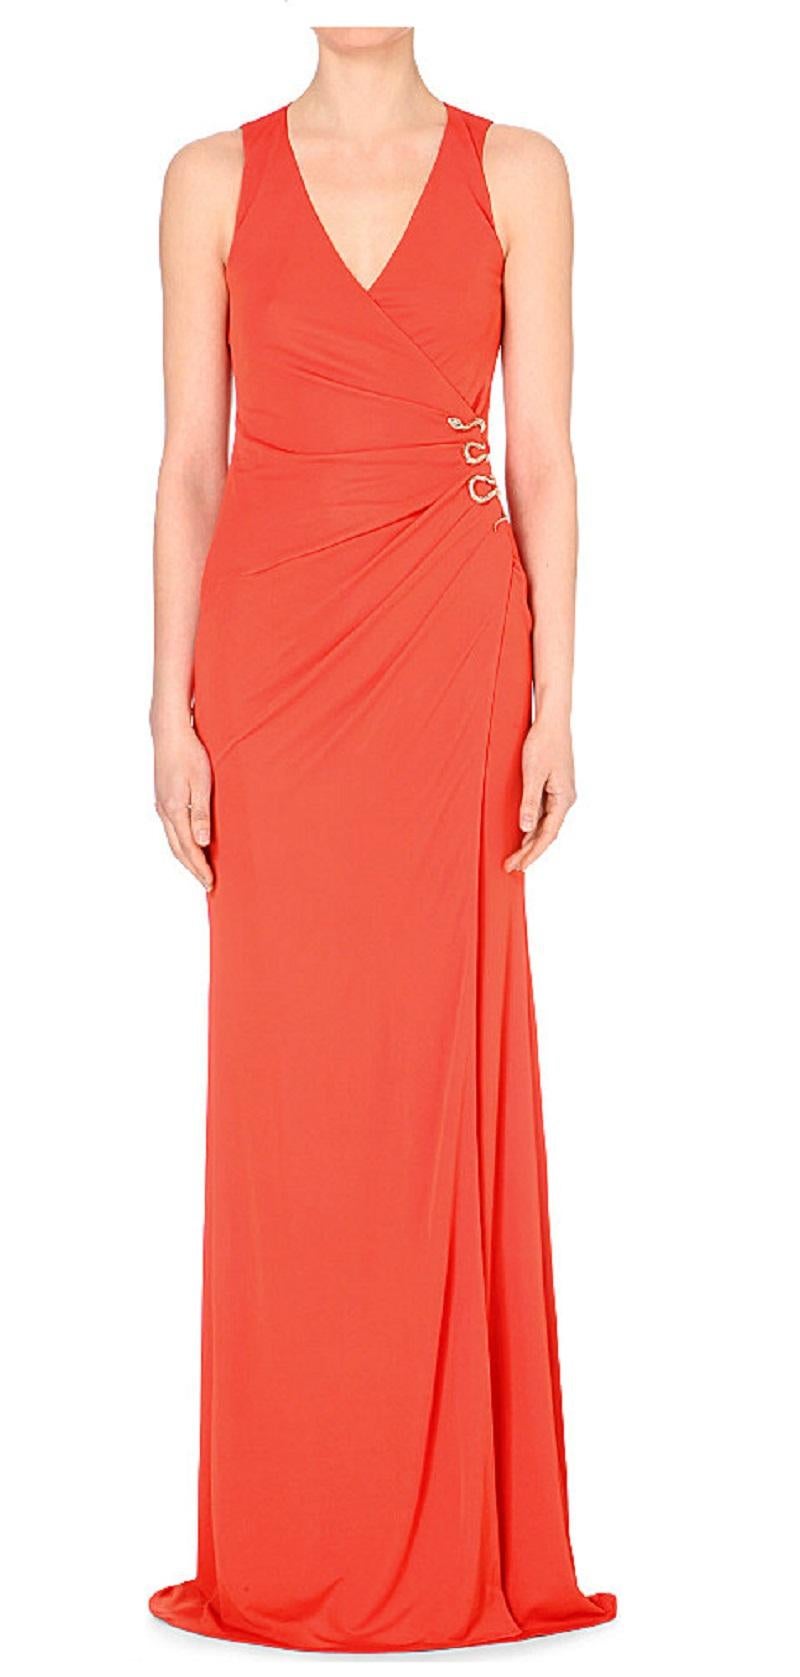 Roberto Cavalli Orange Jersey Gown with Goldtone Side Snake Detail 
Made In: Italy Color: Orange
Materials: 100% rayon 
Lining: 100% rayon
Opening/Closure: Hidden side zip
Overall Condition: Excellent pre-owned condition, with the exception of minor